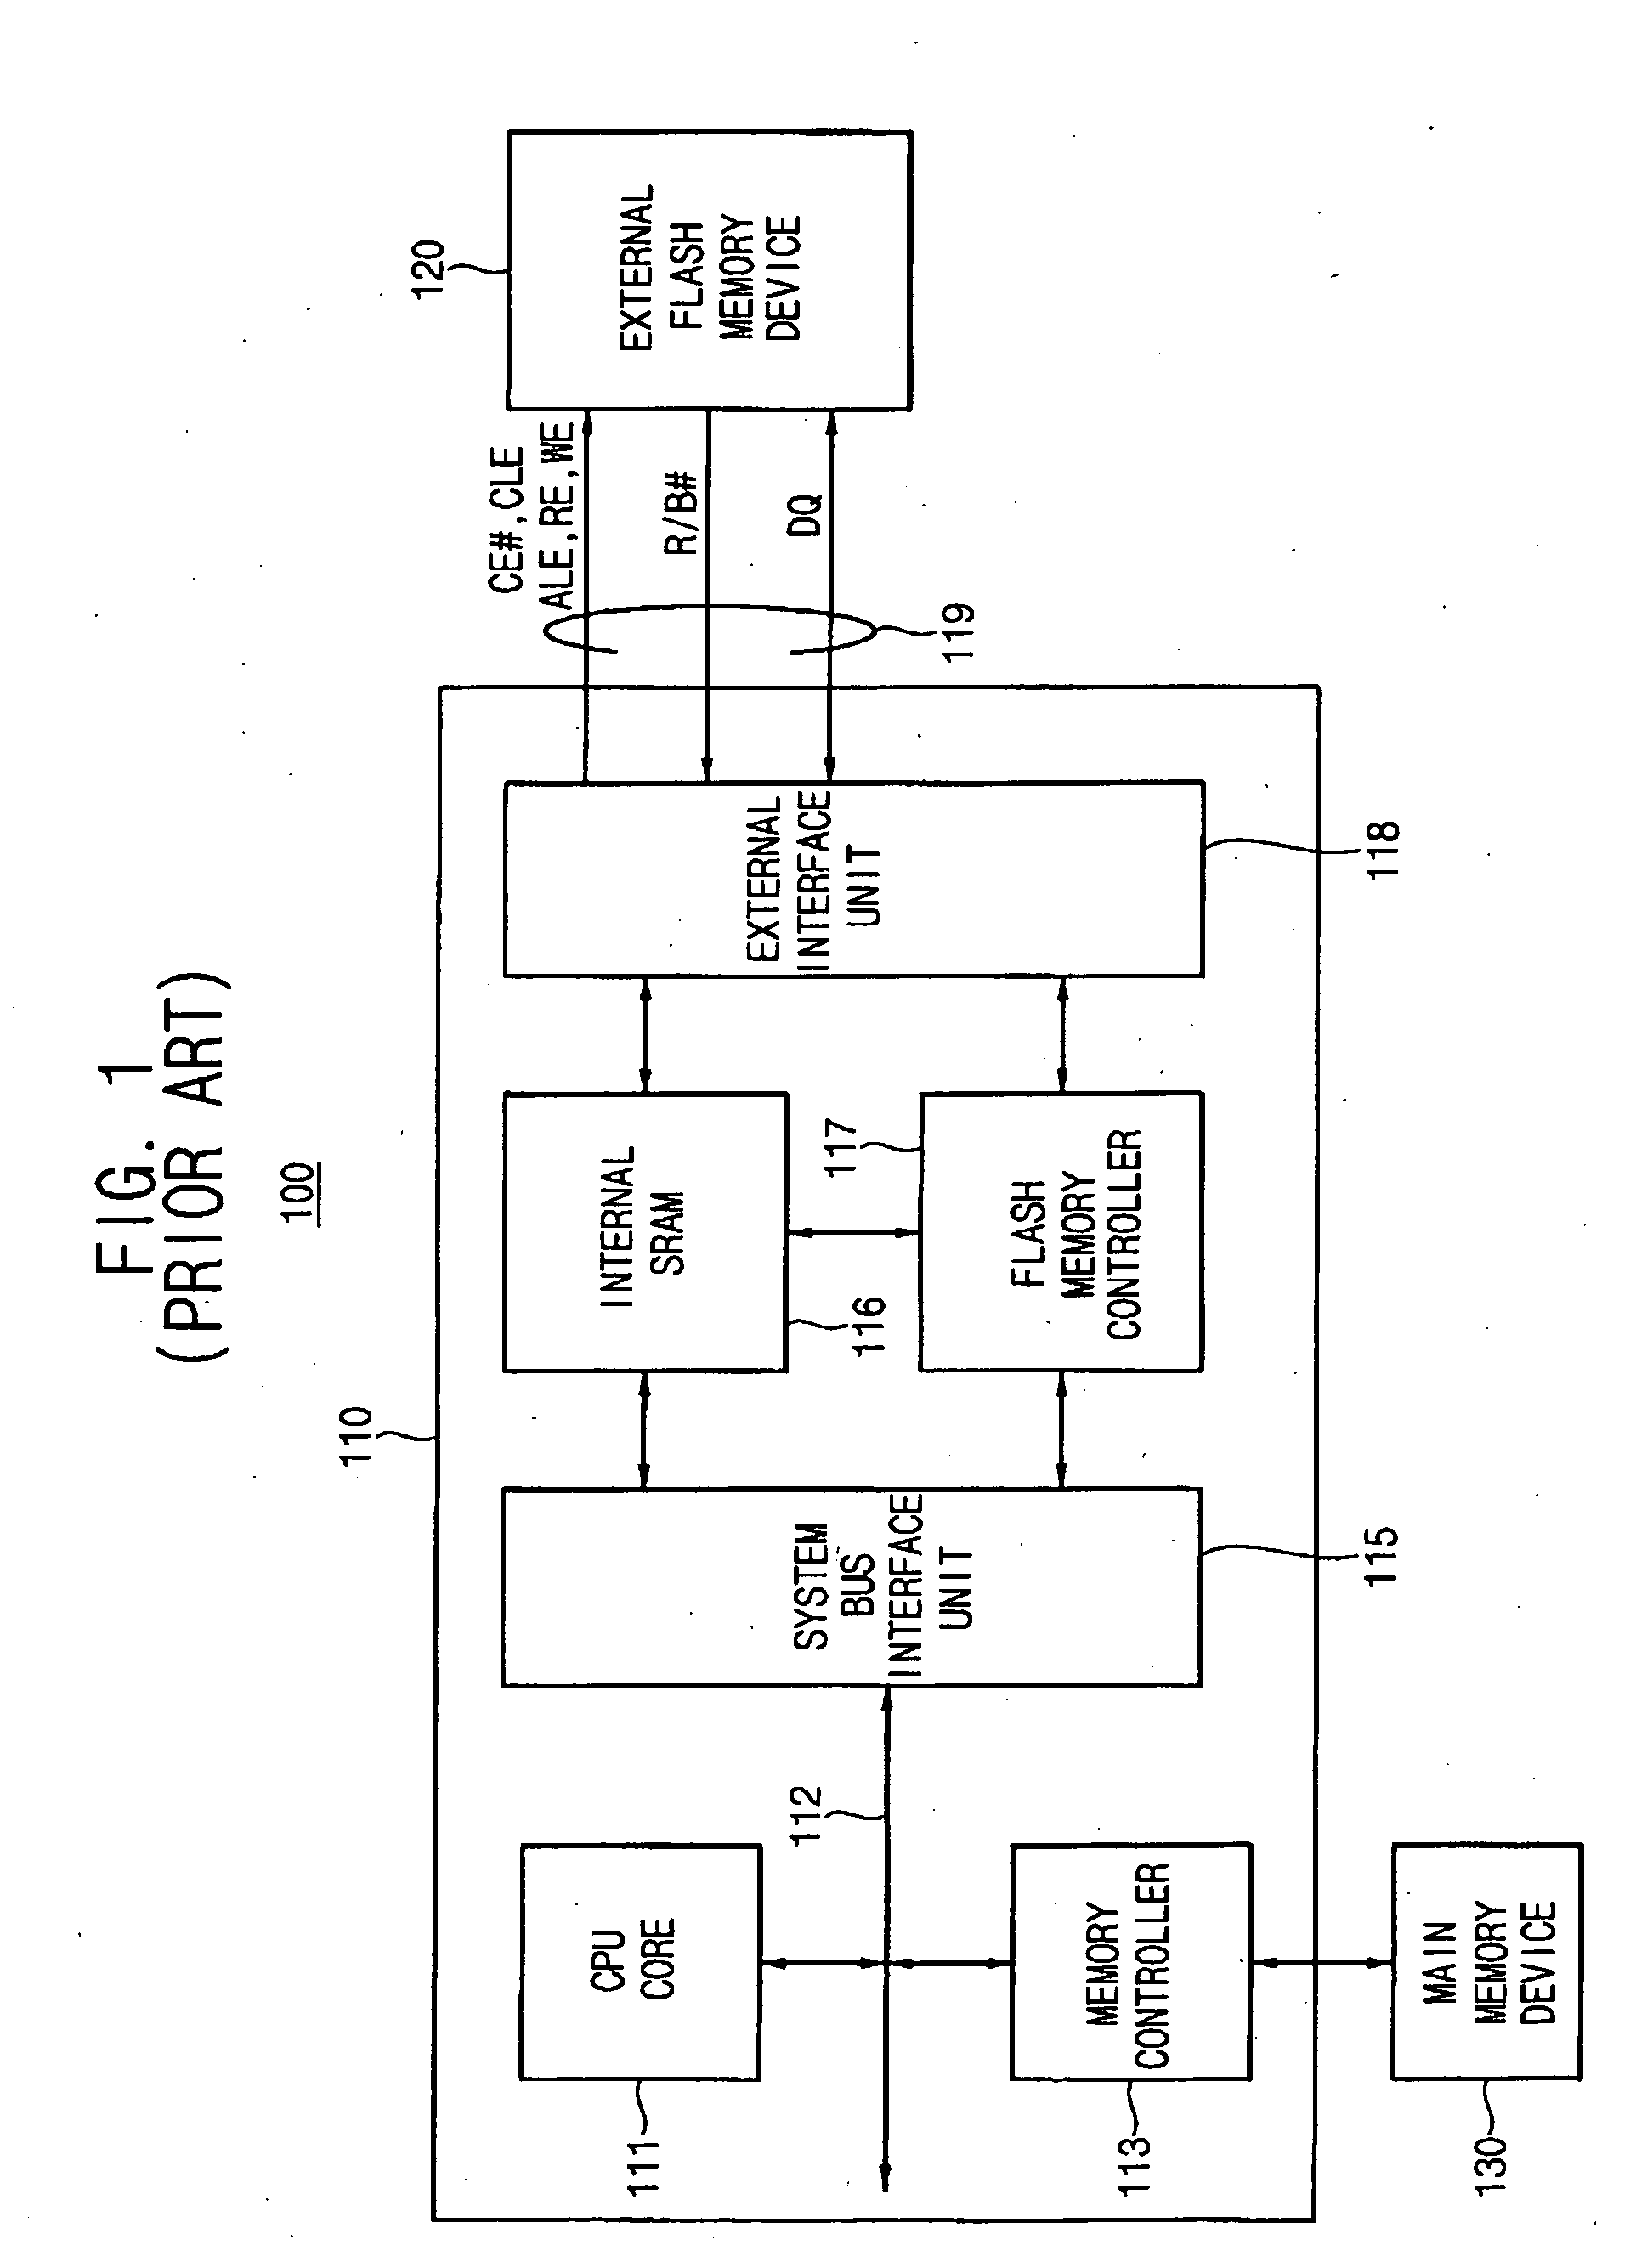 System and method of booting an operating system for a computer